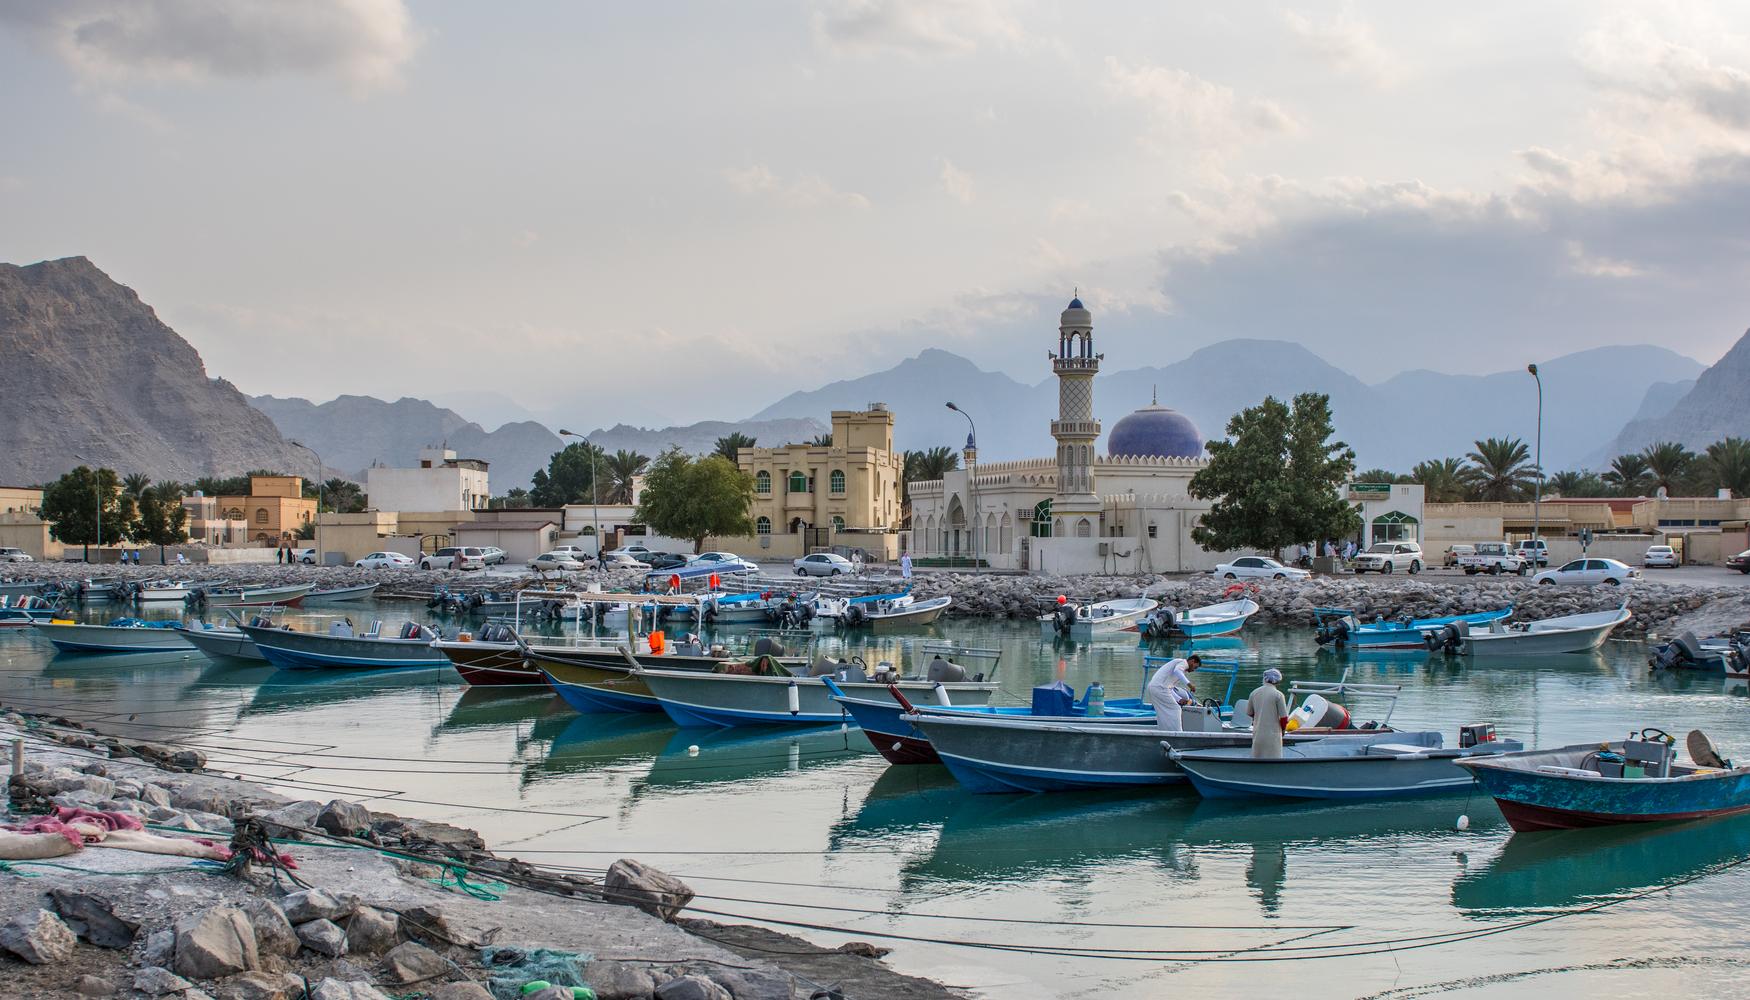 Holidays in Oman from £810 - Search Flight+Hotel on KAYAK